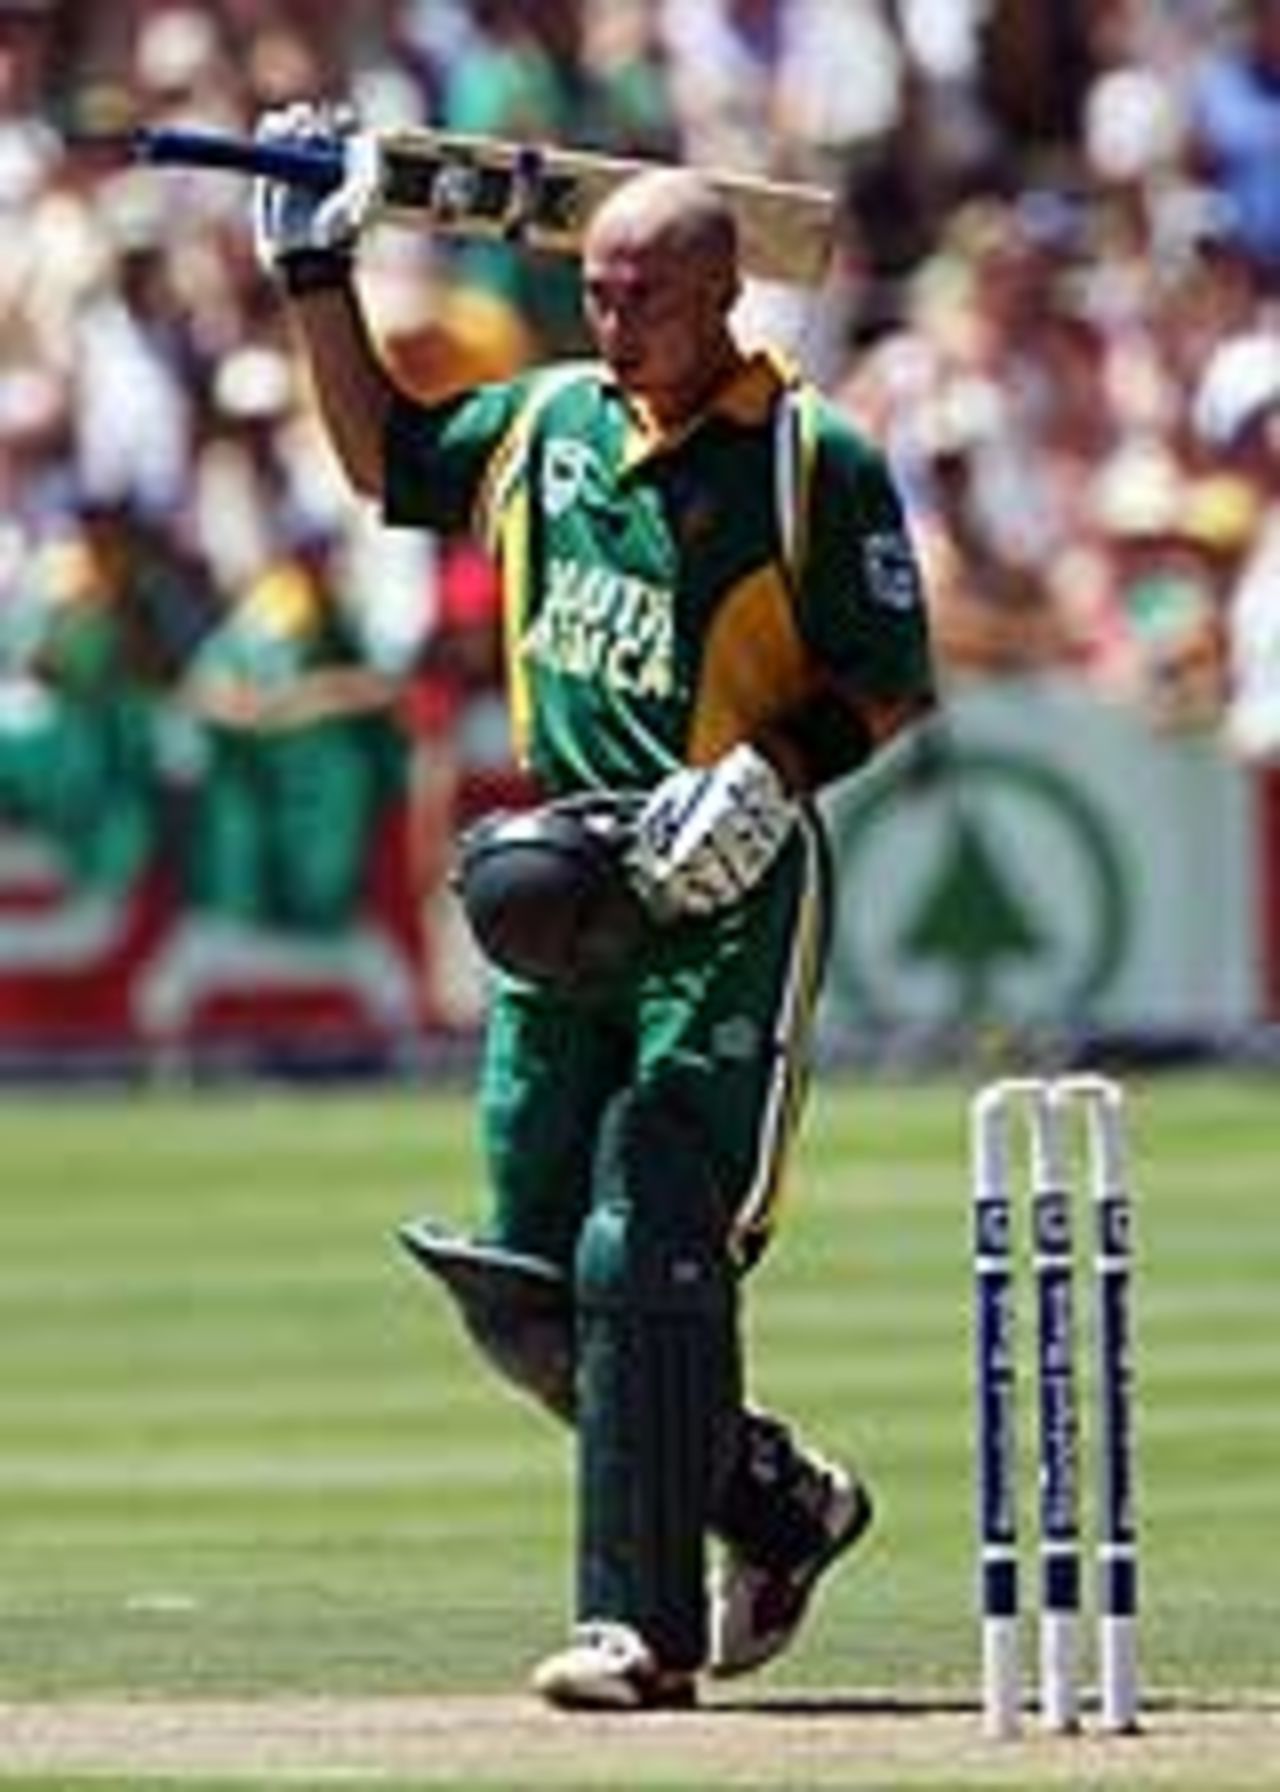 Herschelle Gibbs celebrates his 14th ODI century at Newlands, South Africa v England, Newlands, February 6, 2005